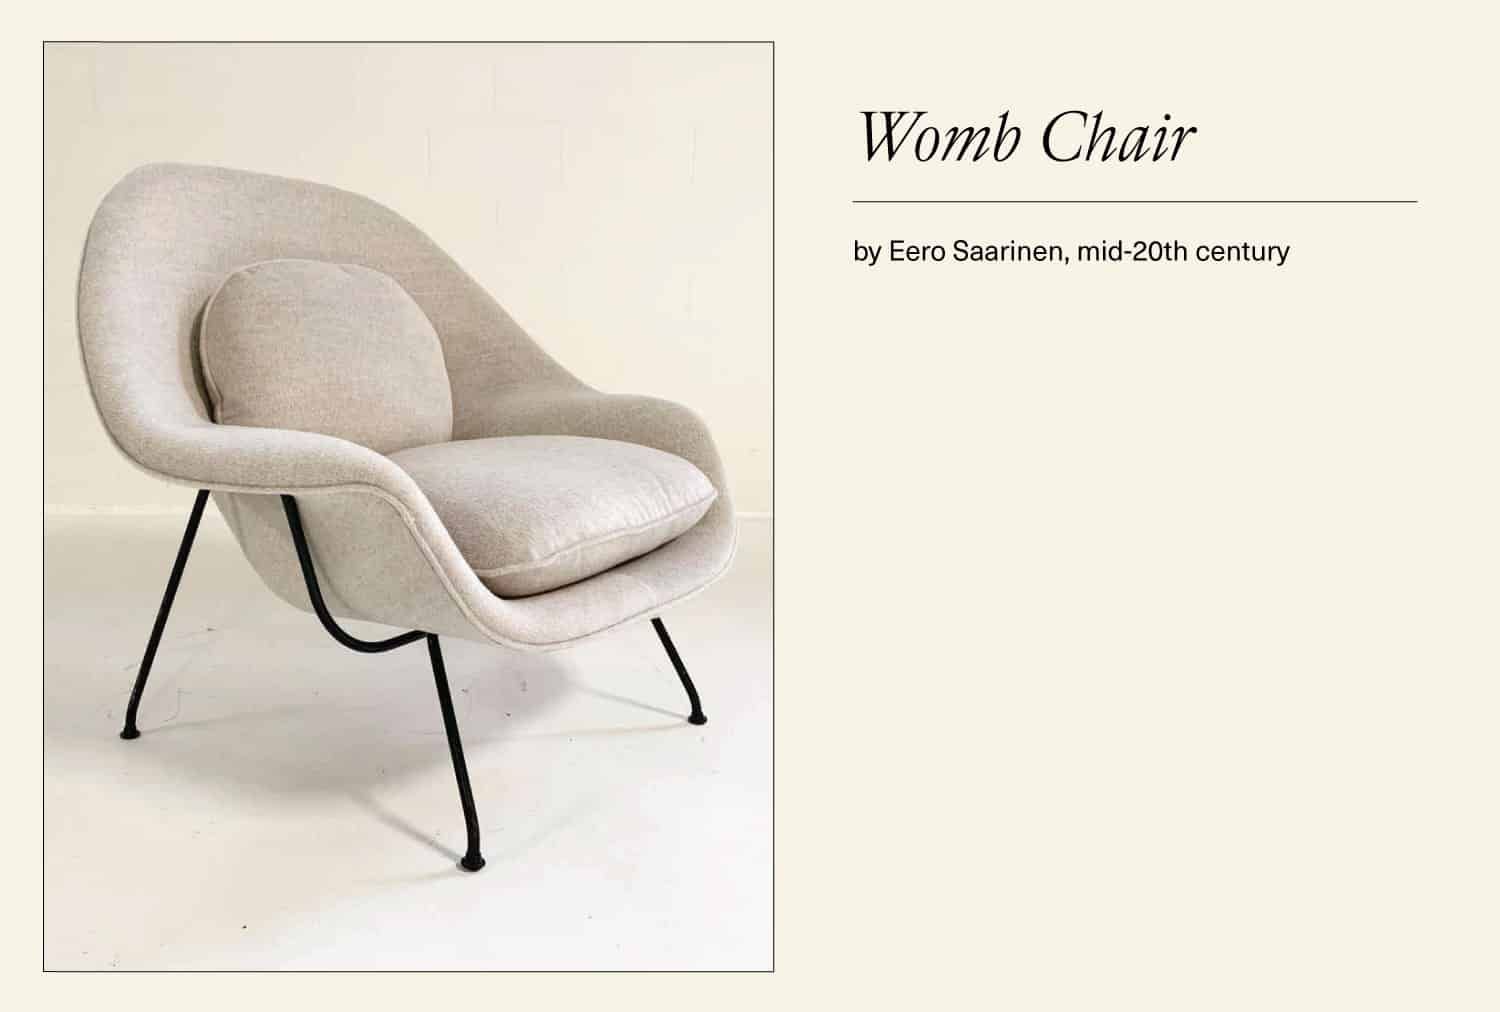 White Womb chair